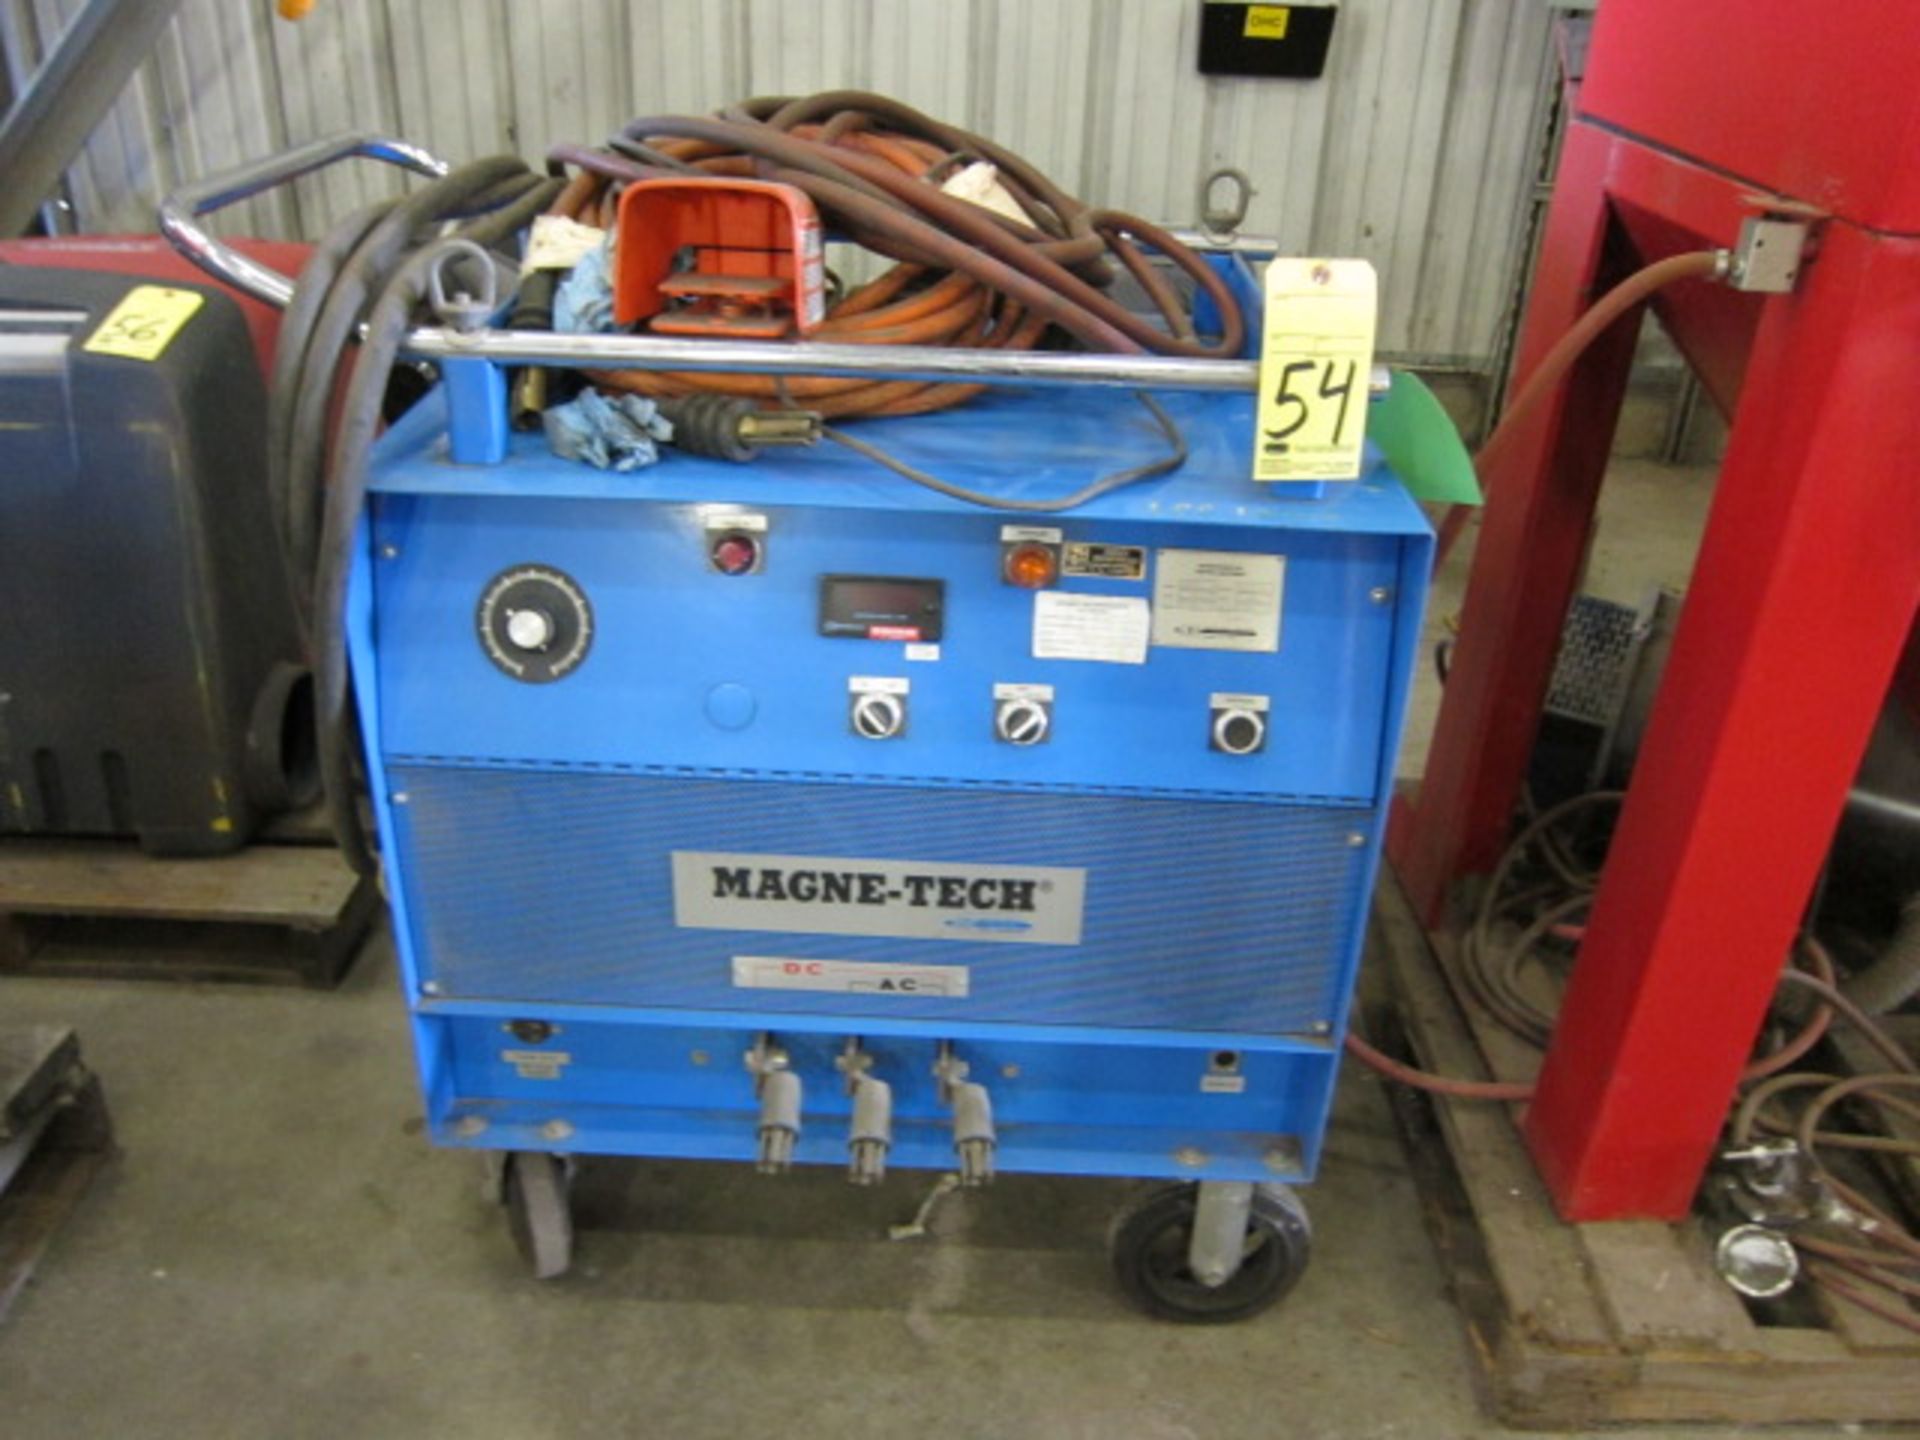 PORTABLE MAGNETIC PARTICLE INSPECTION MACHINE, MAGNE-TECH MDL. 1560W, S/N 110005